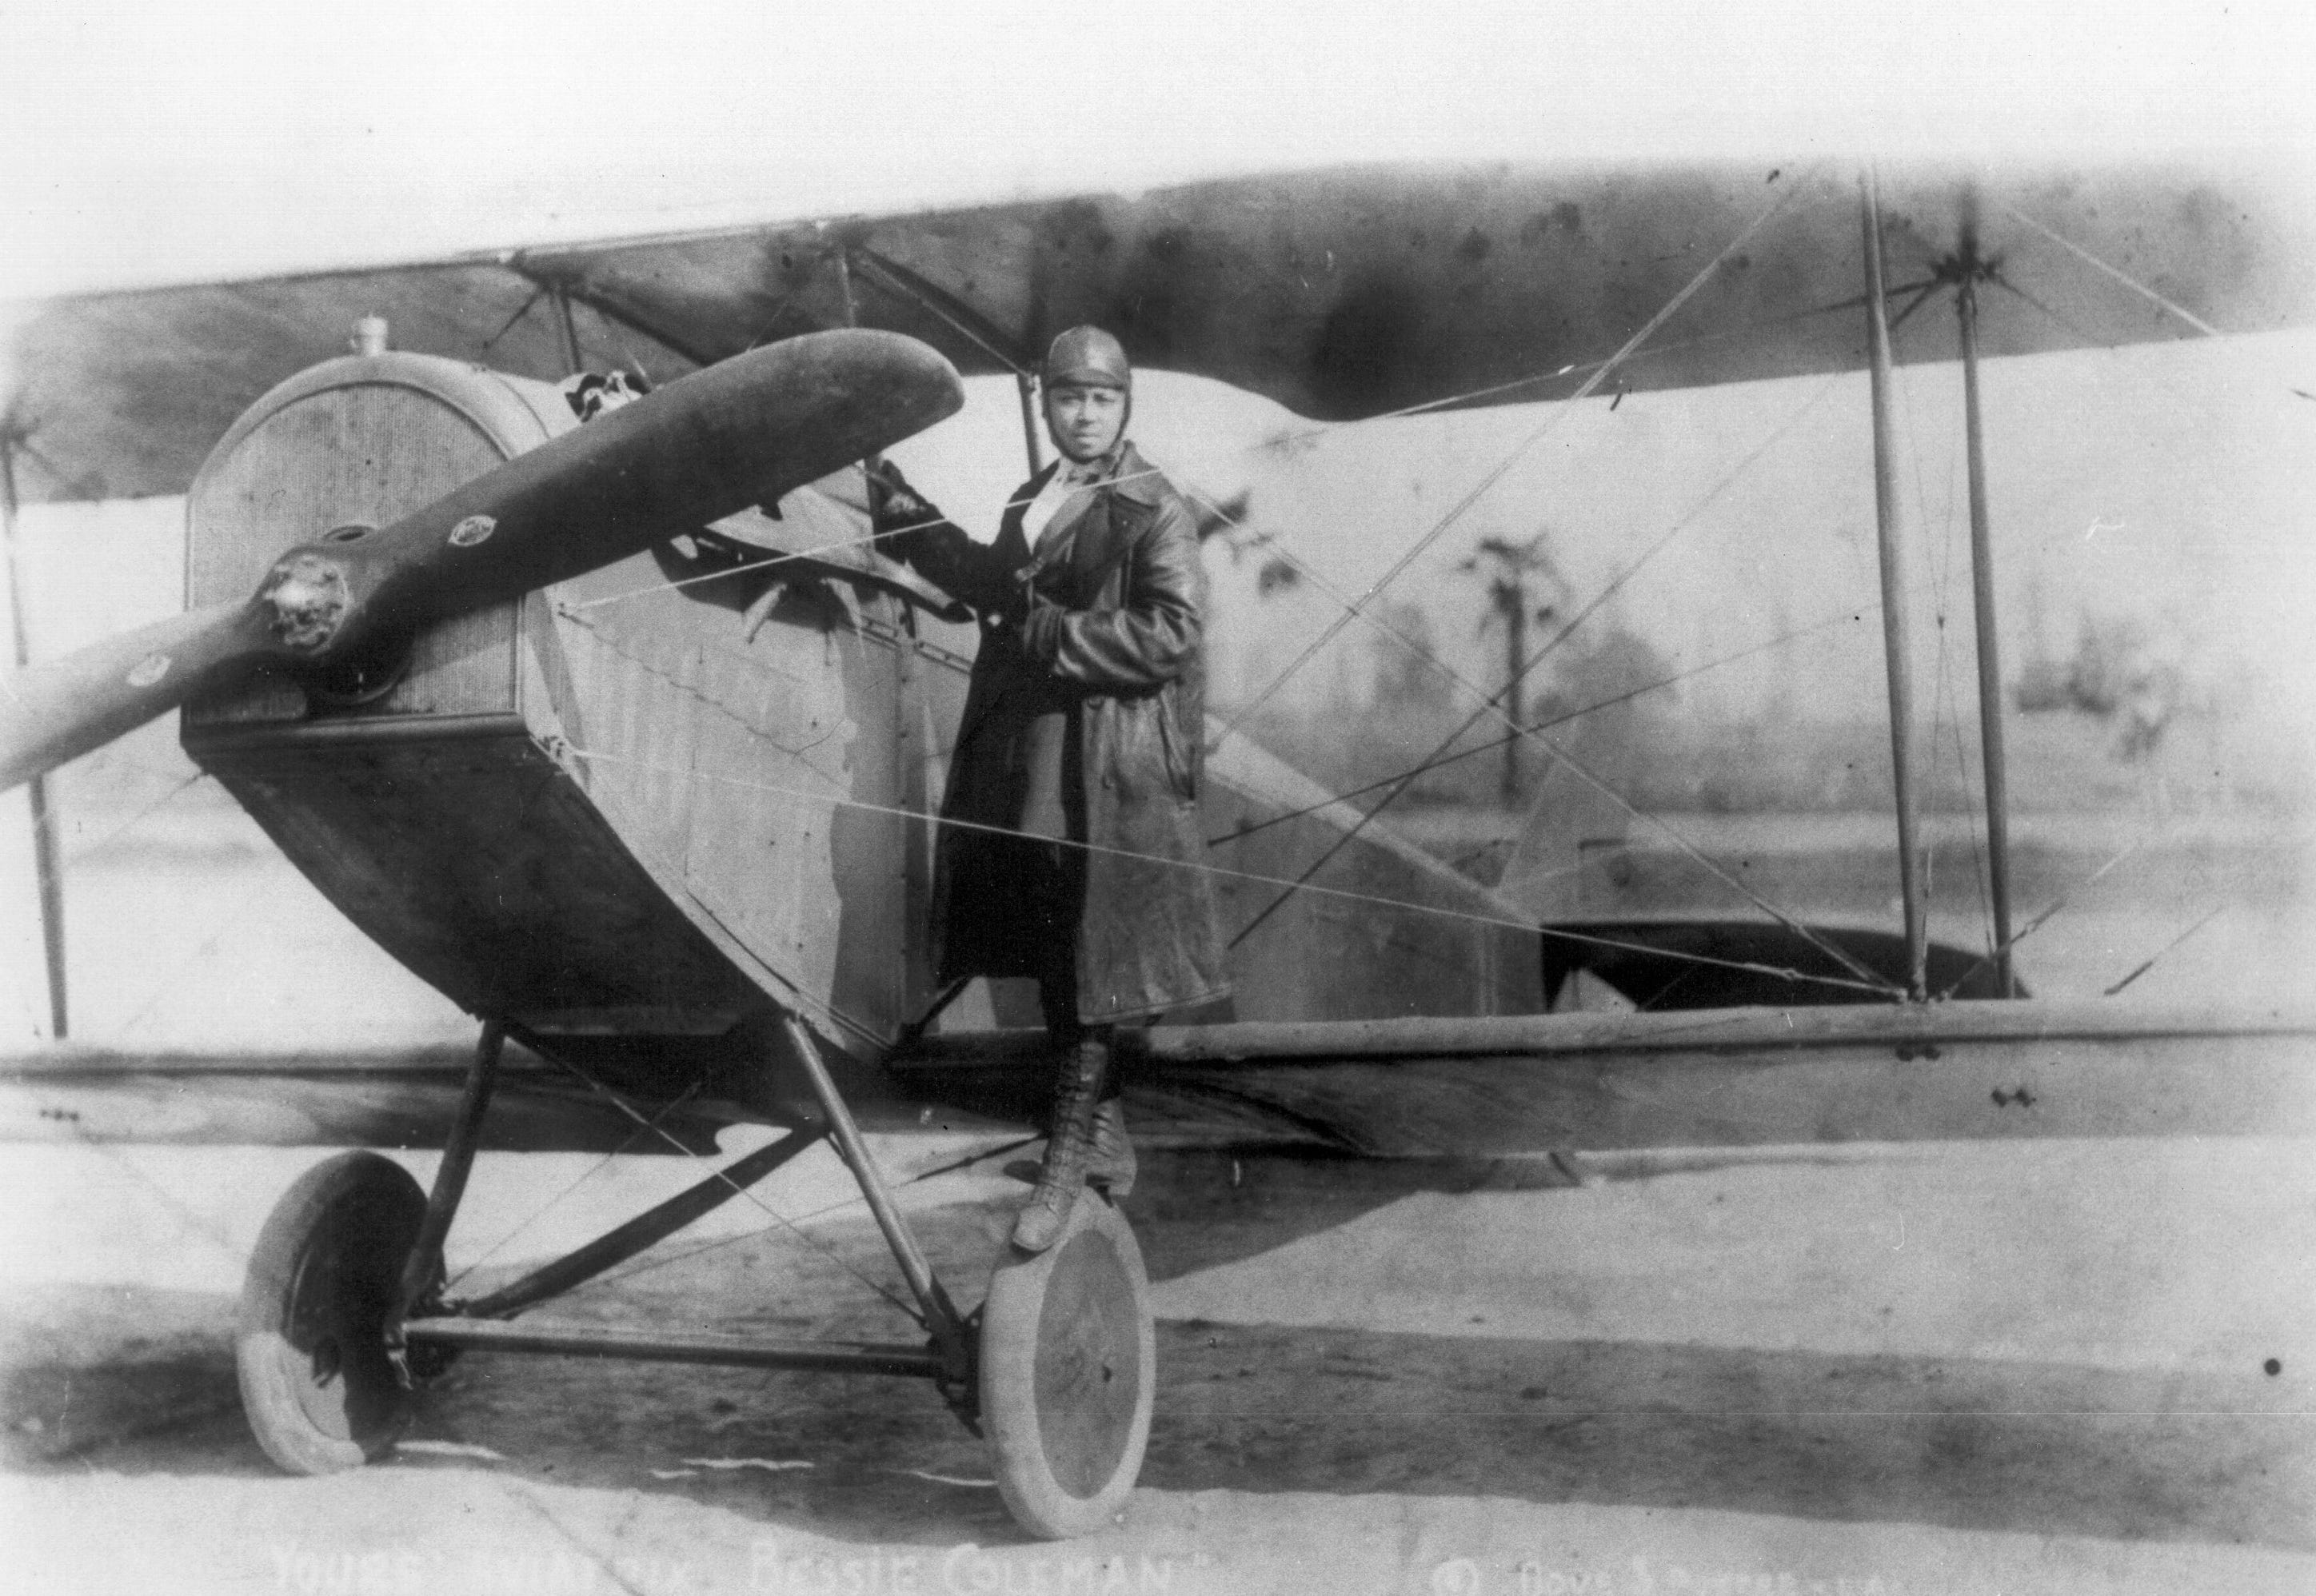 The first black woman aviator had to leave the U.S. in order to achieve her  dreams | by Timeline | Timeline